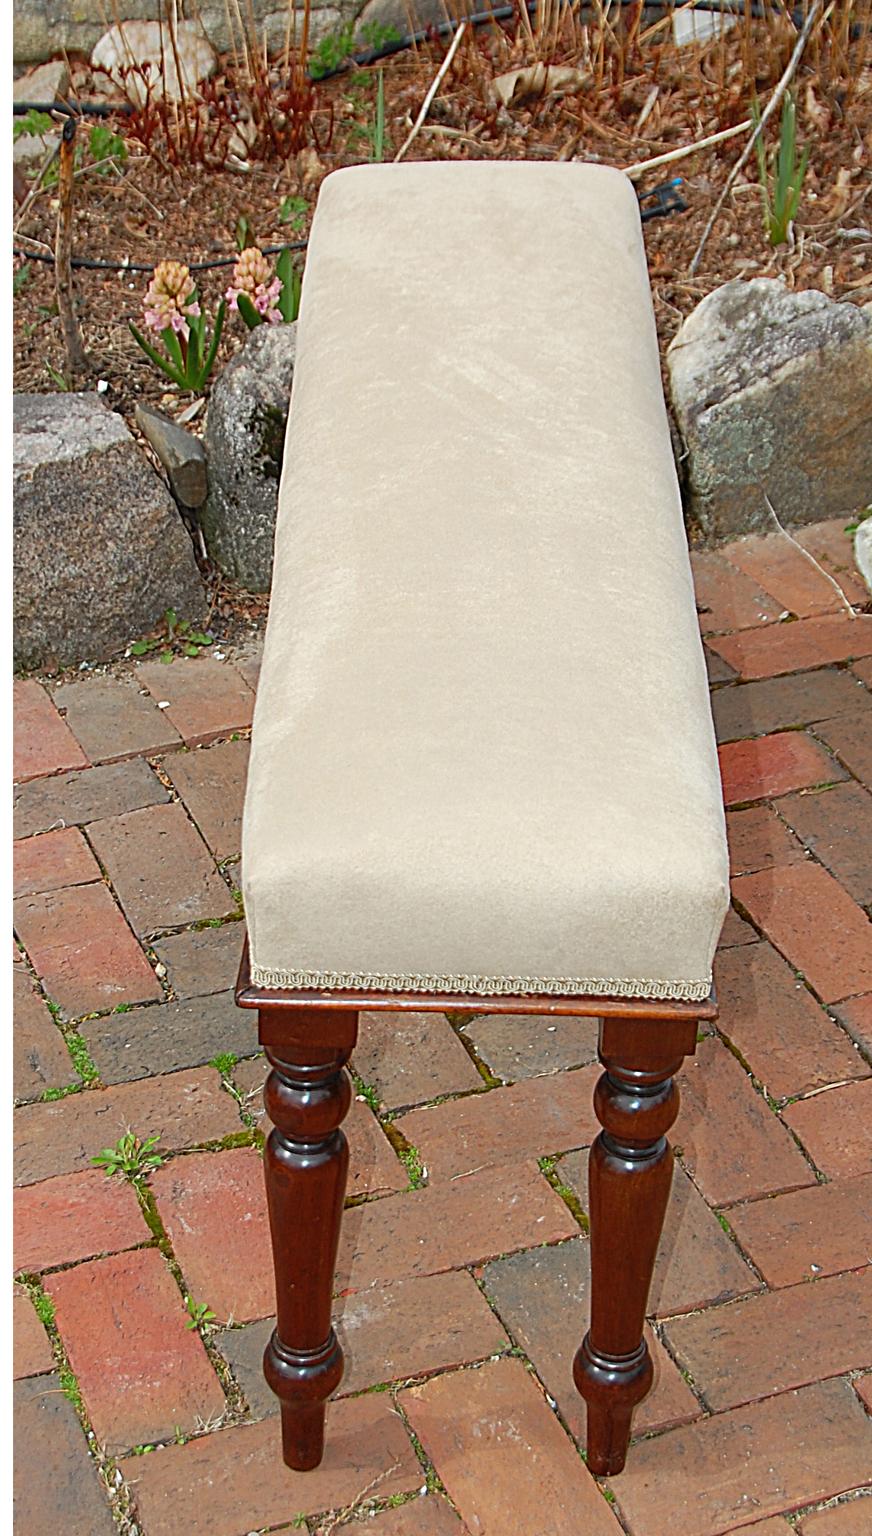 English mid-19th century upholstered bench with turned mahogany legs, and mahogany small molding to seat edge. The newly upholstered bench has a fawn colored ultrasuede fabric. At only 44 inches long this versatile bench can find a home in most